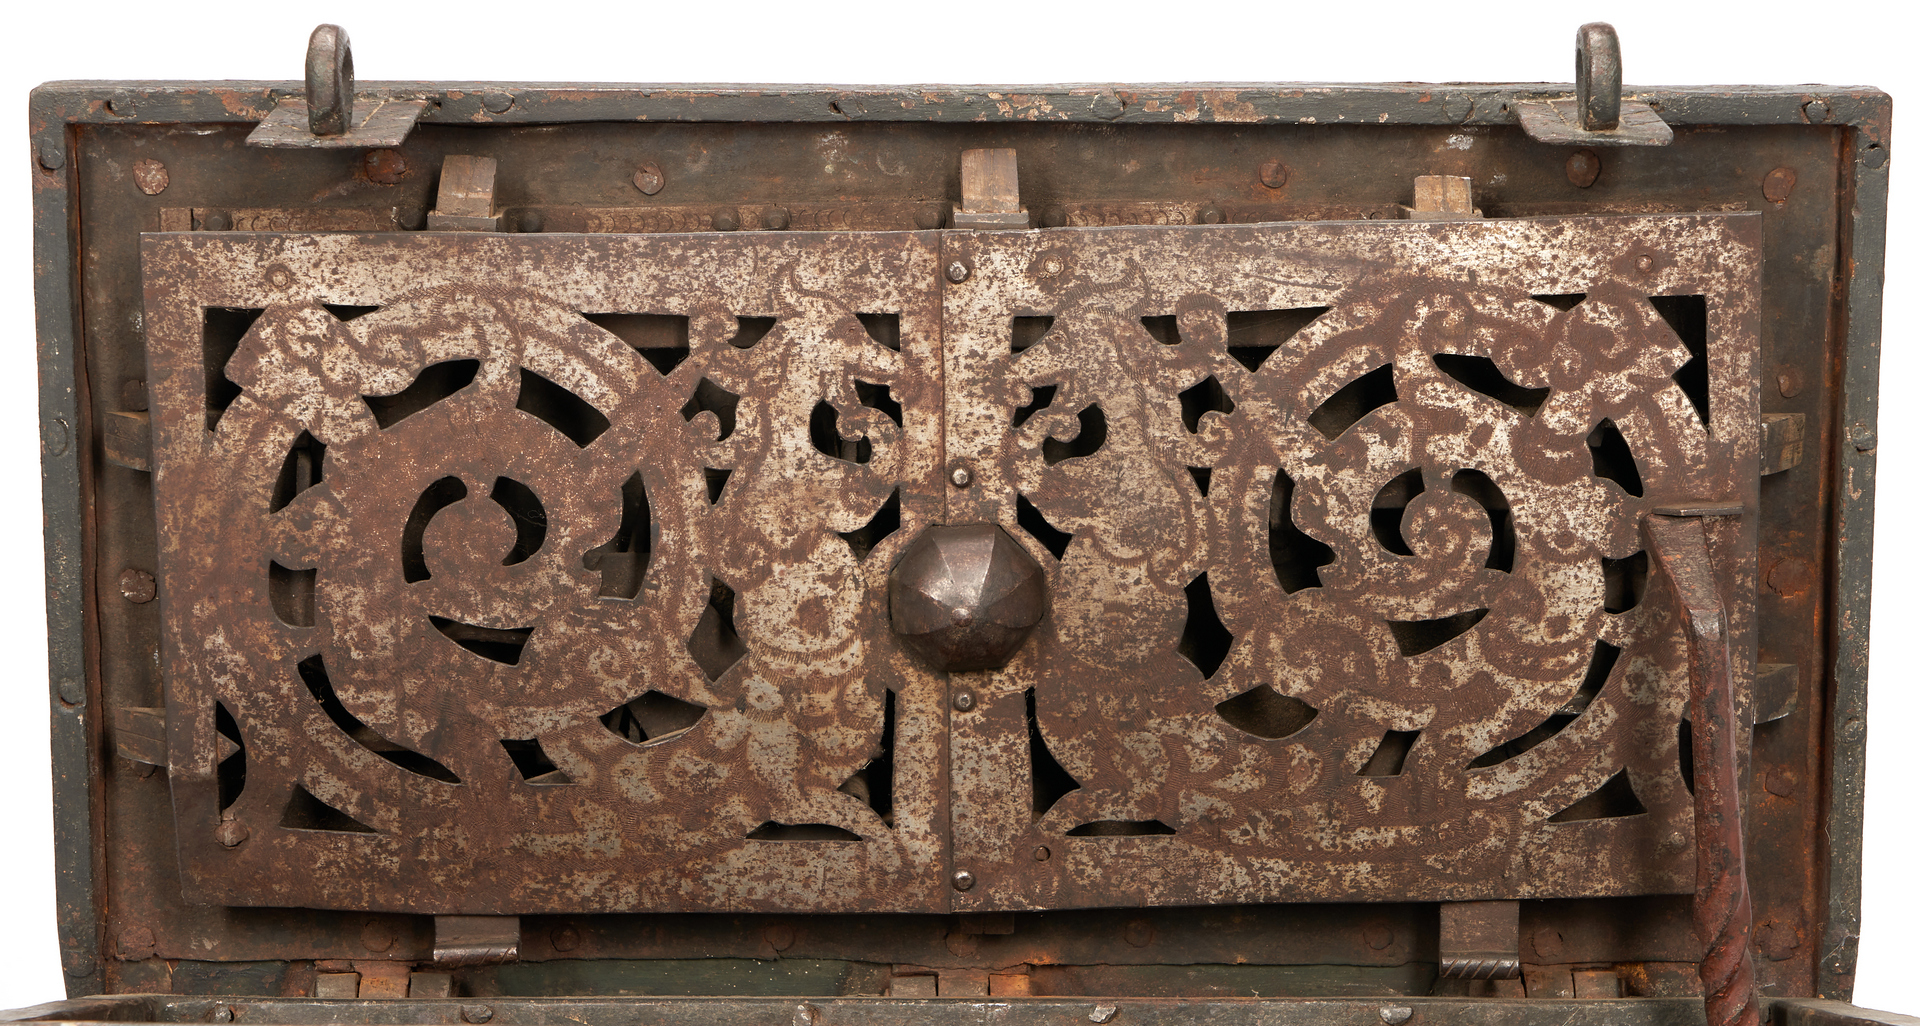 Lot 286: 17th Century German Painted War Chest